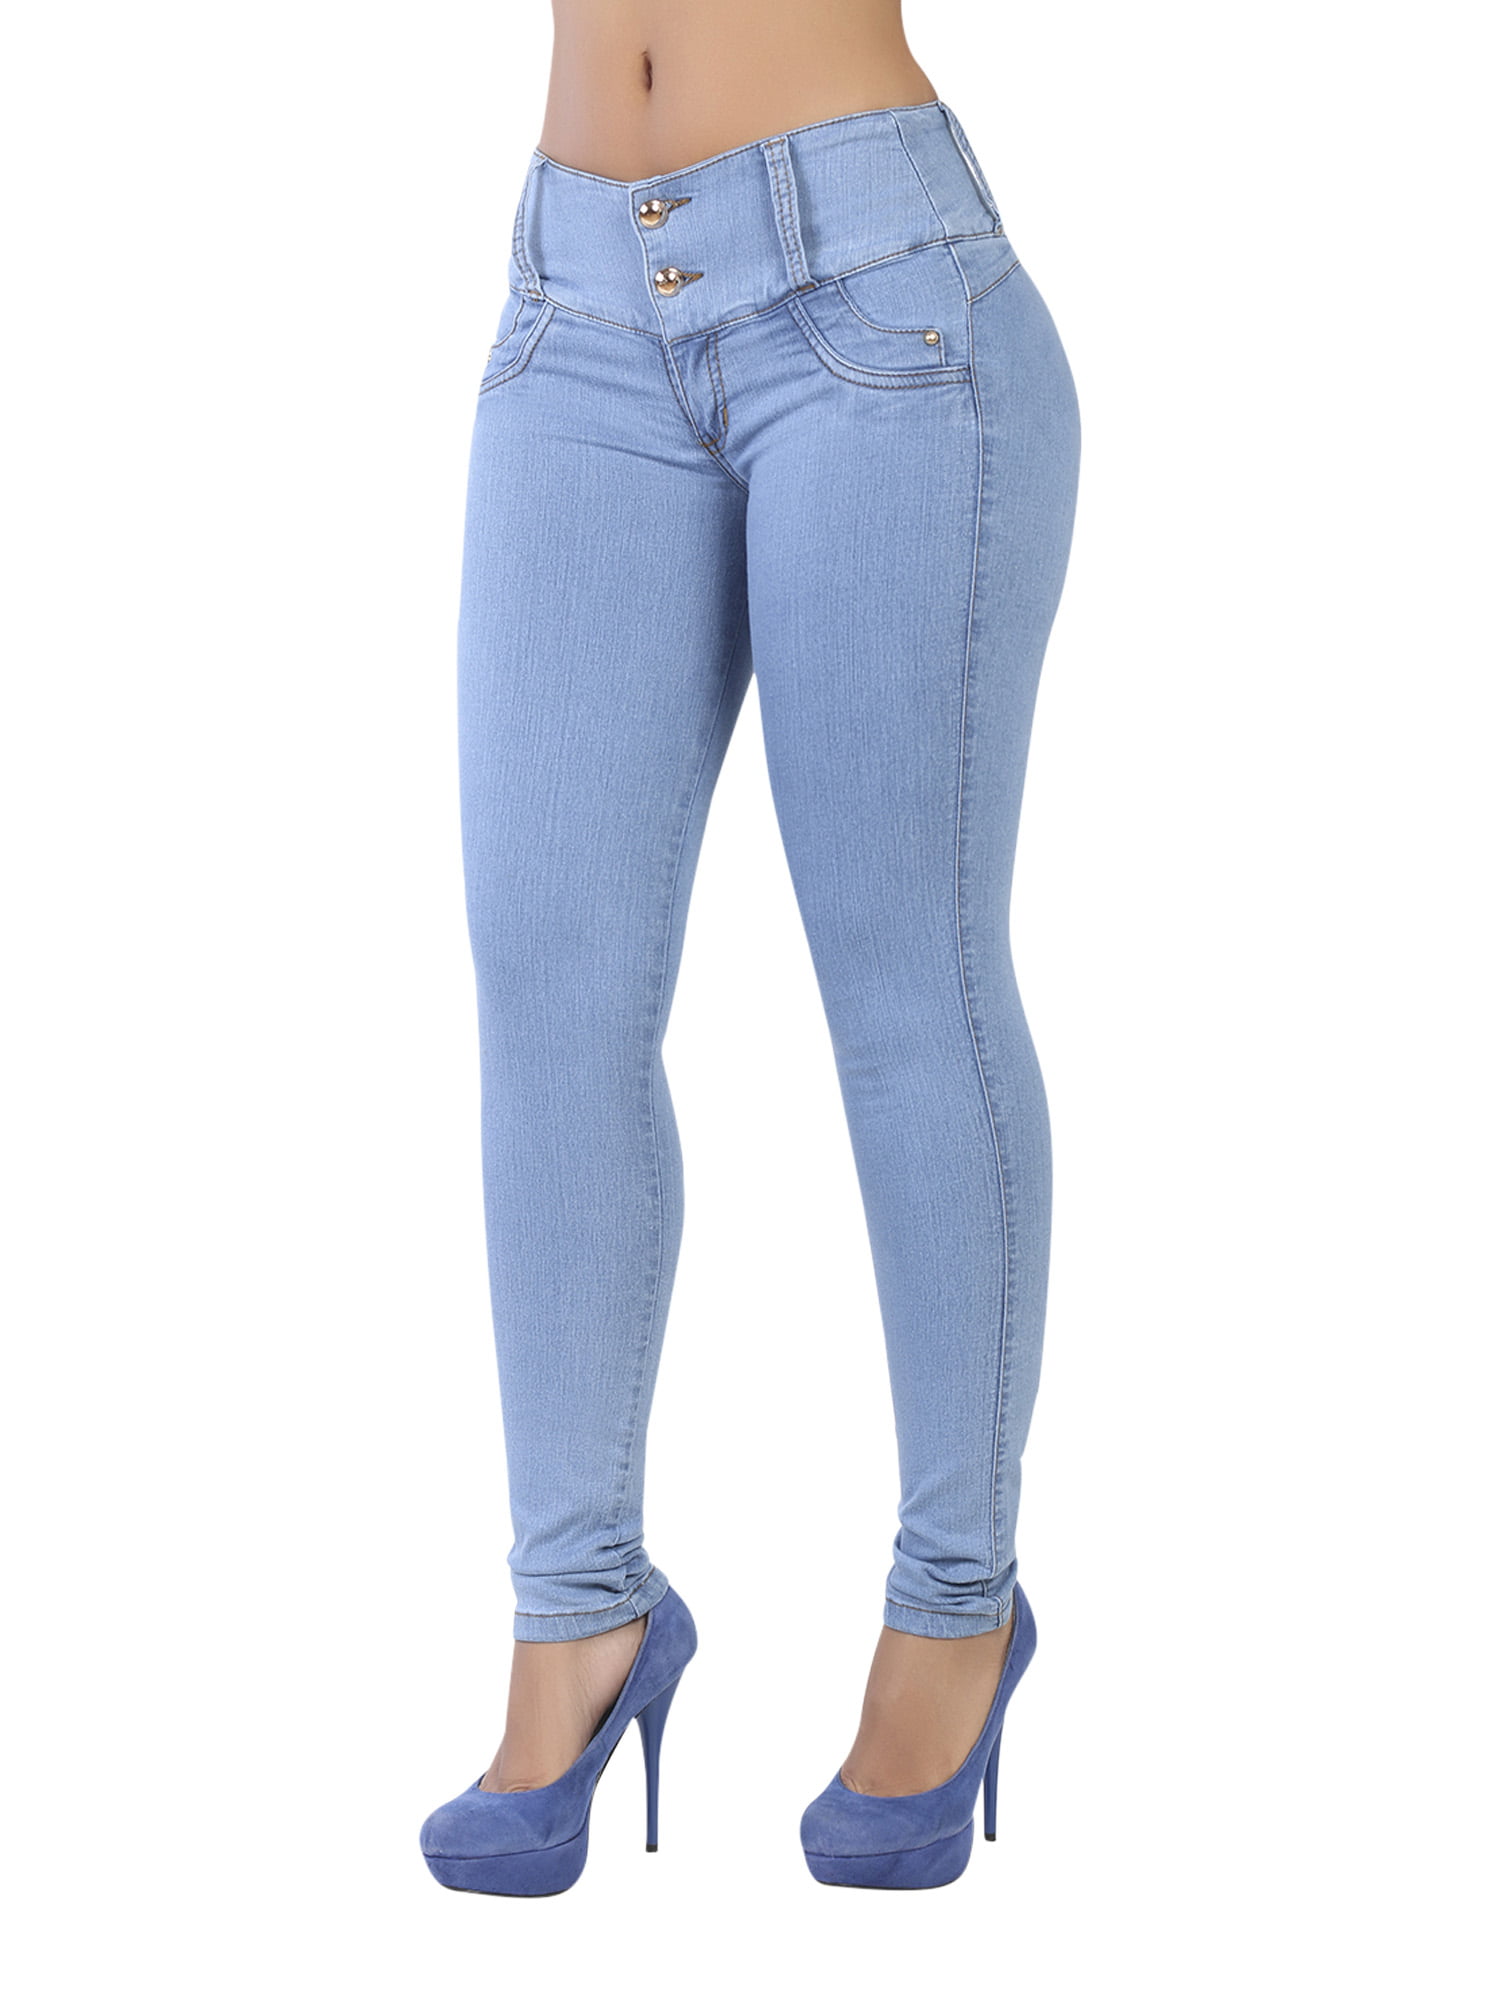 Curvify 764 Women's Butt-Lifting Skinny Jeans